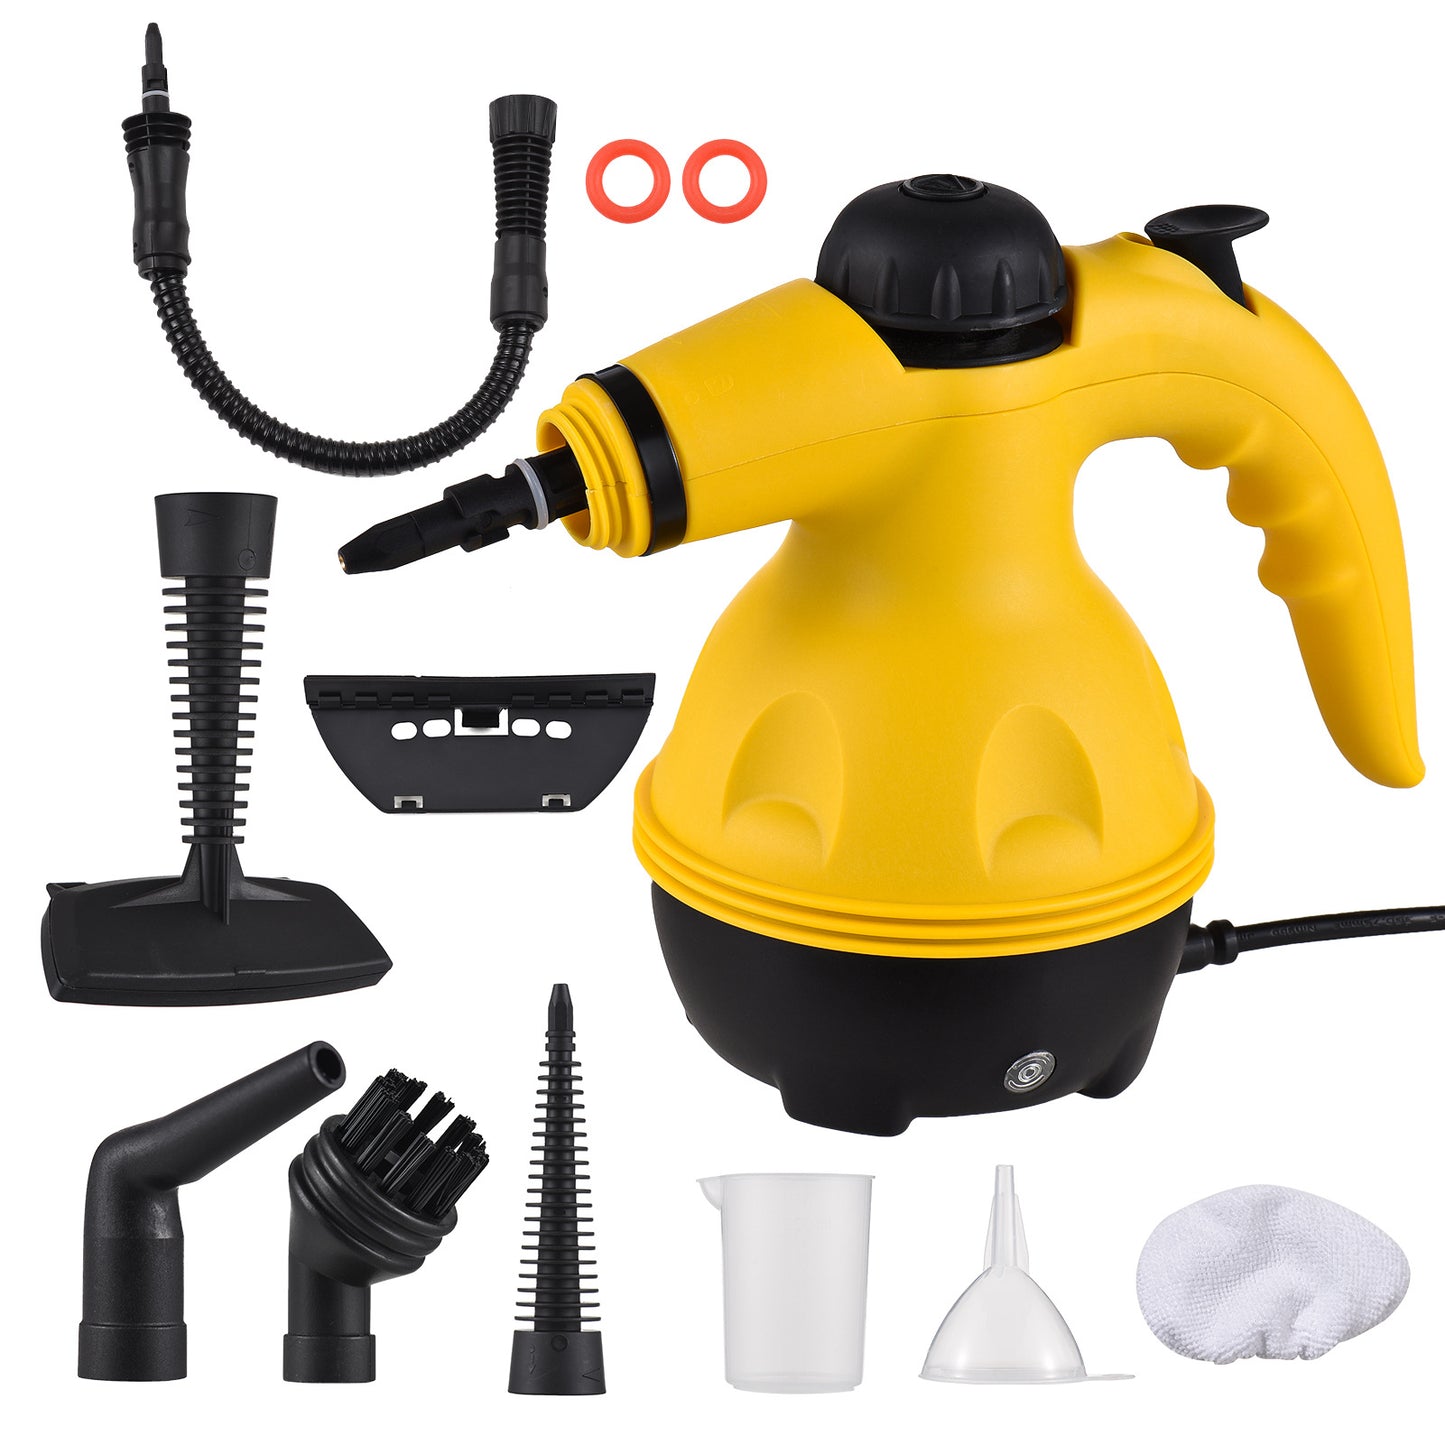 Spot household cleaning machine handheld high temperature steam cleaning machine multi-function cleaner A001